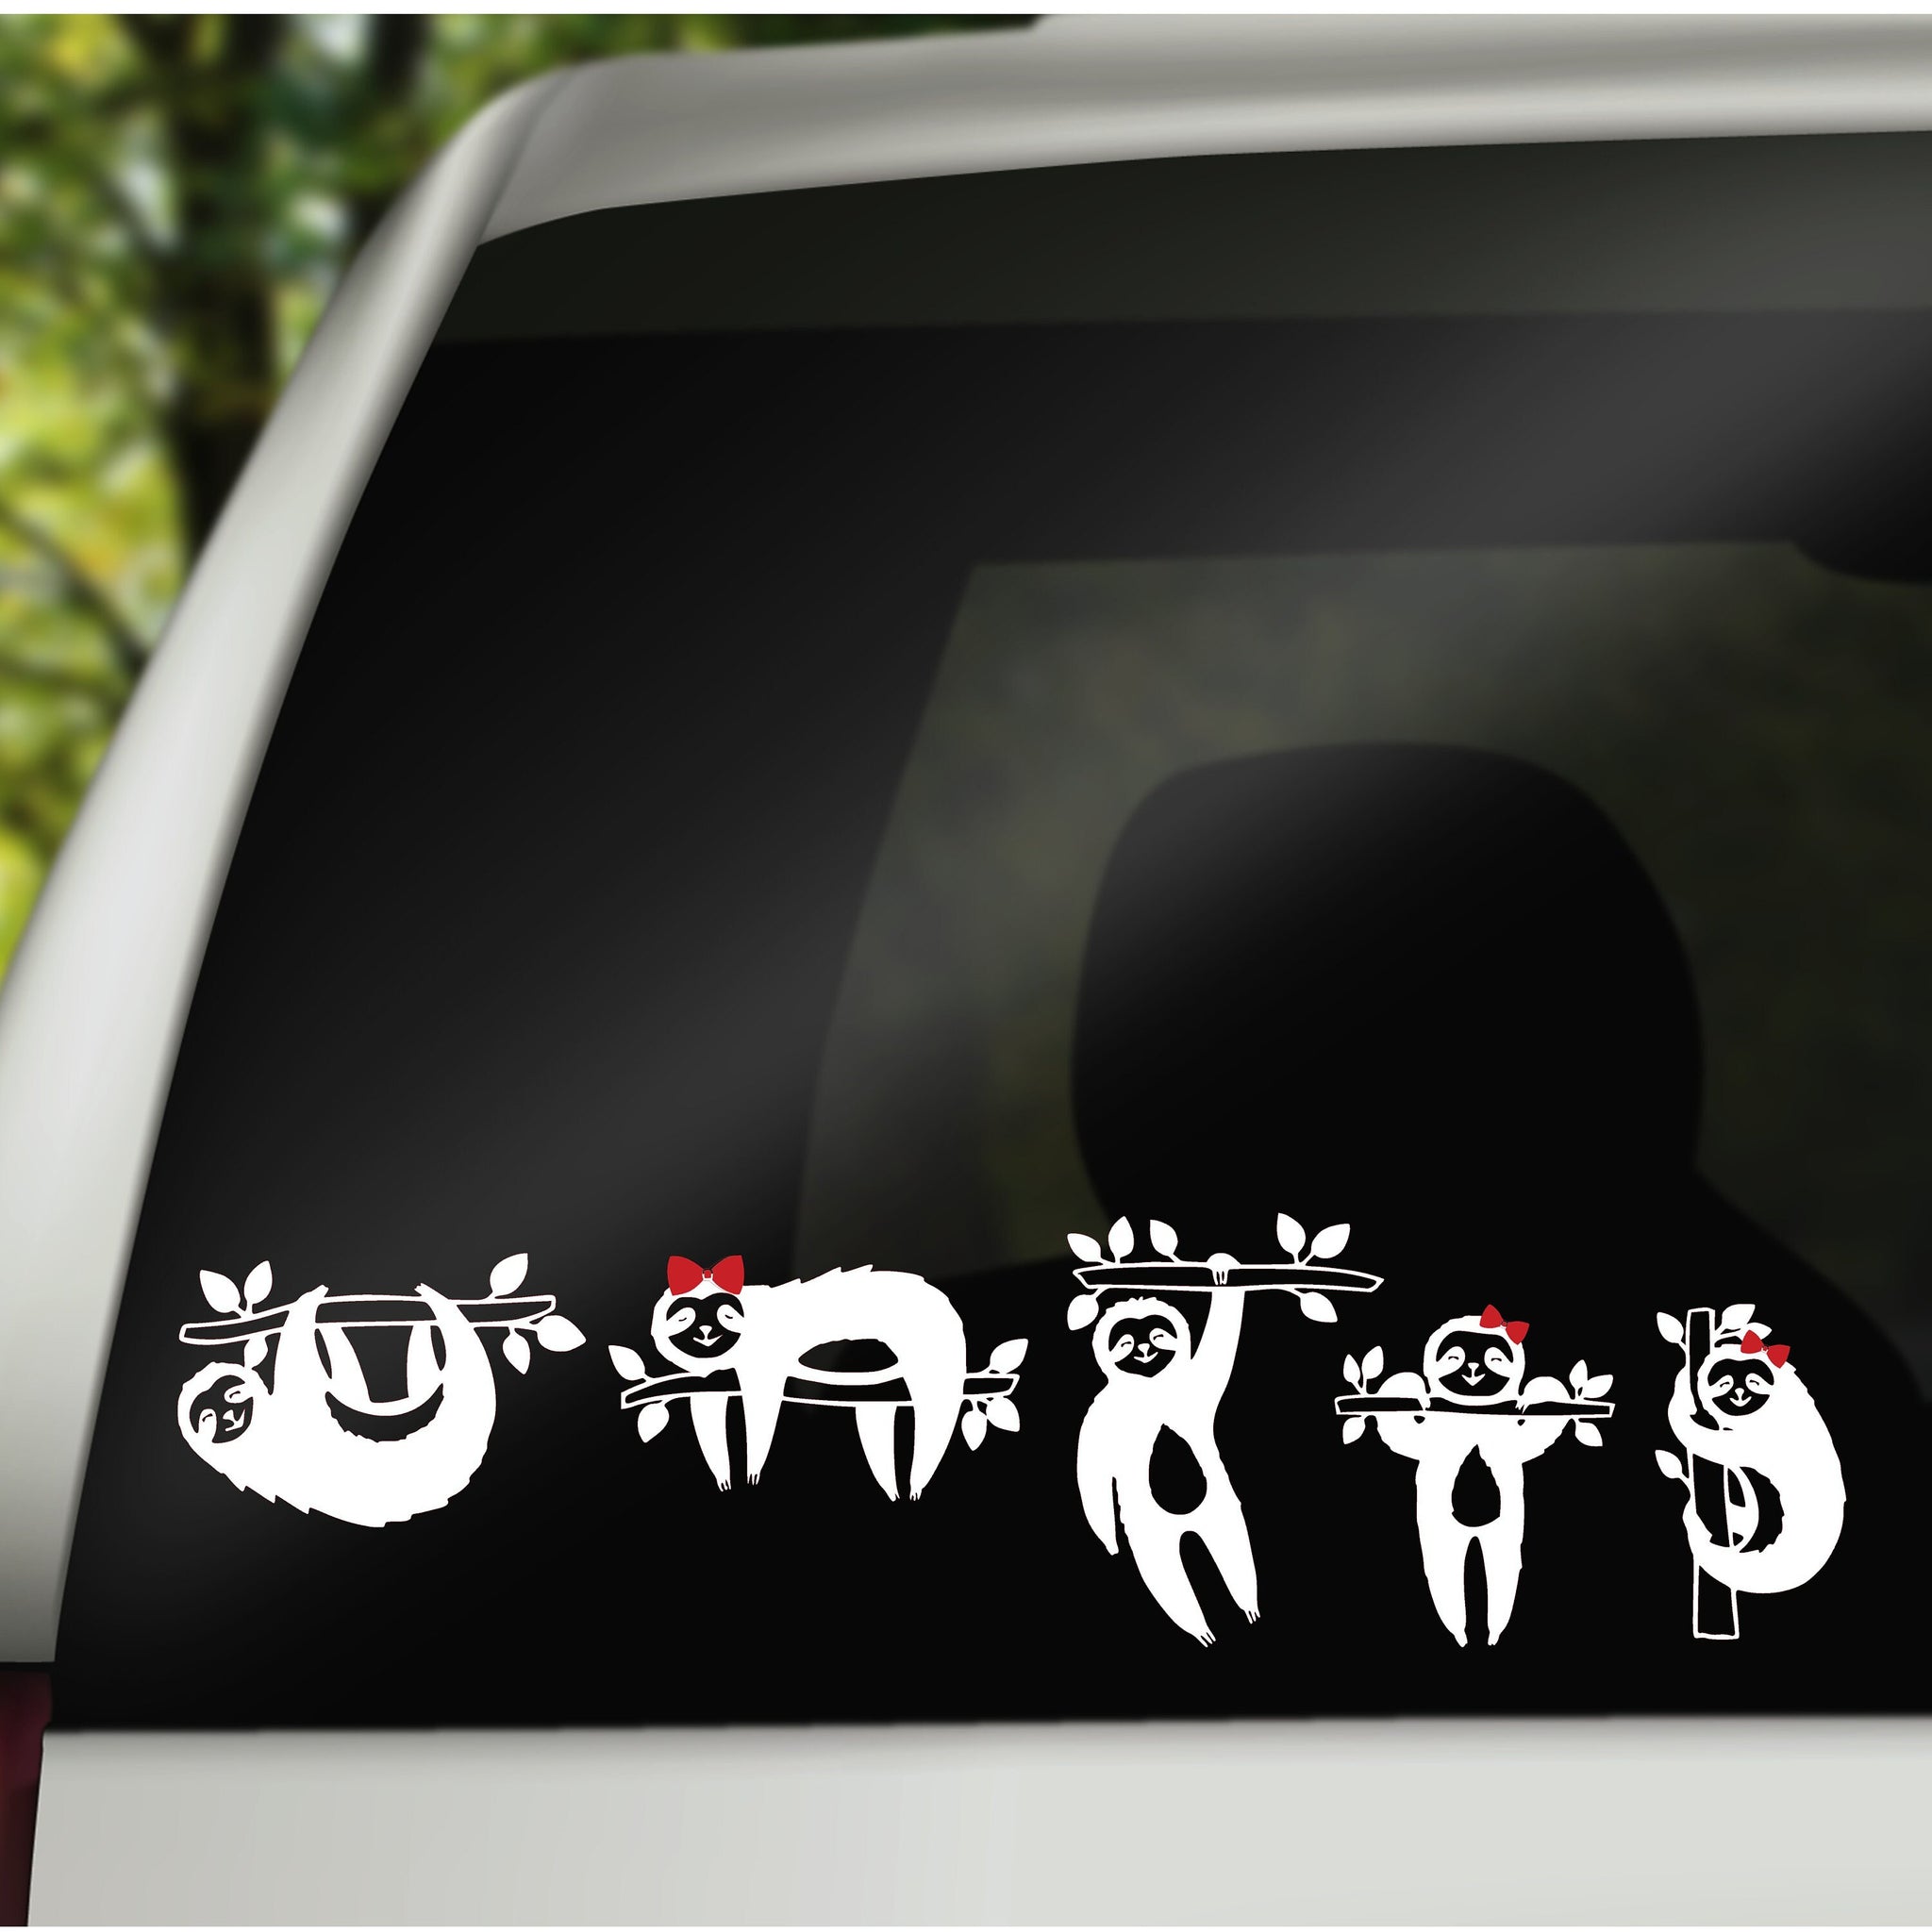 Sloth Family Decals, Car Window Decal, Family Car Stickers, Car Accessories, New Car Gift